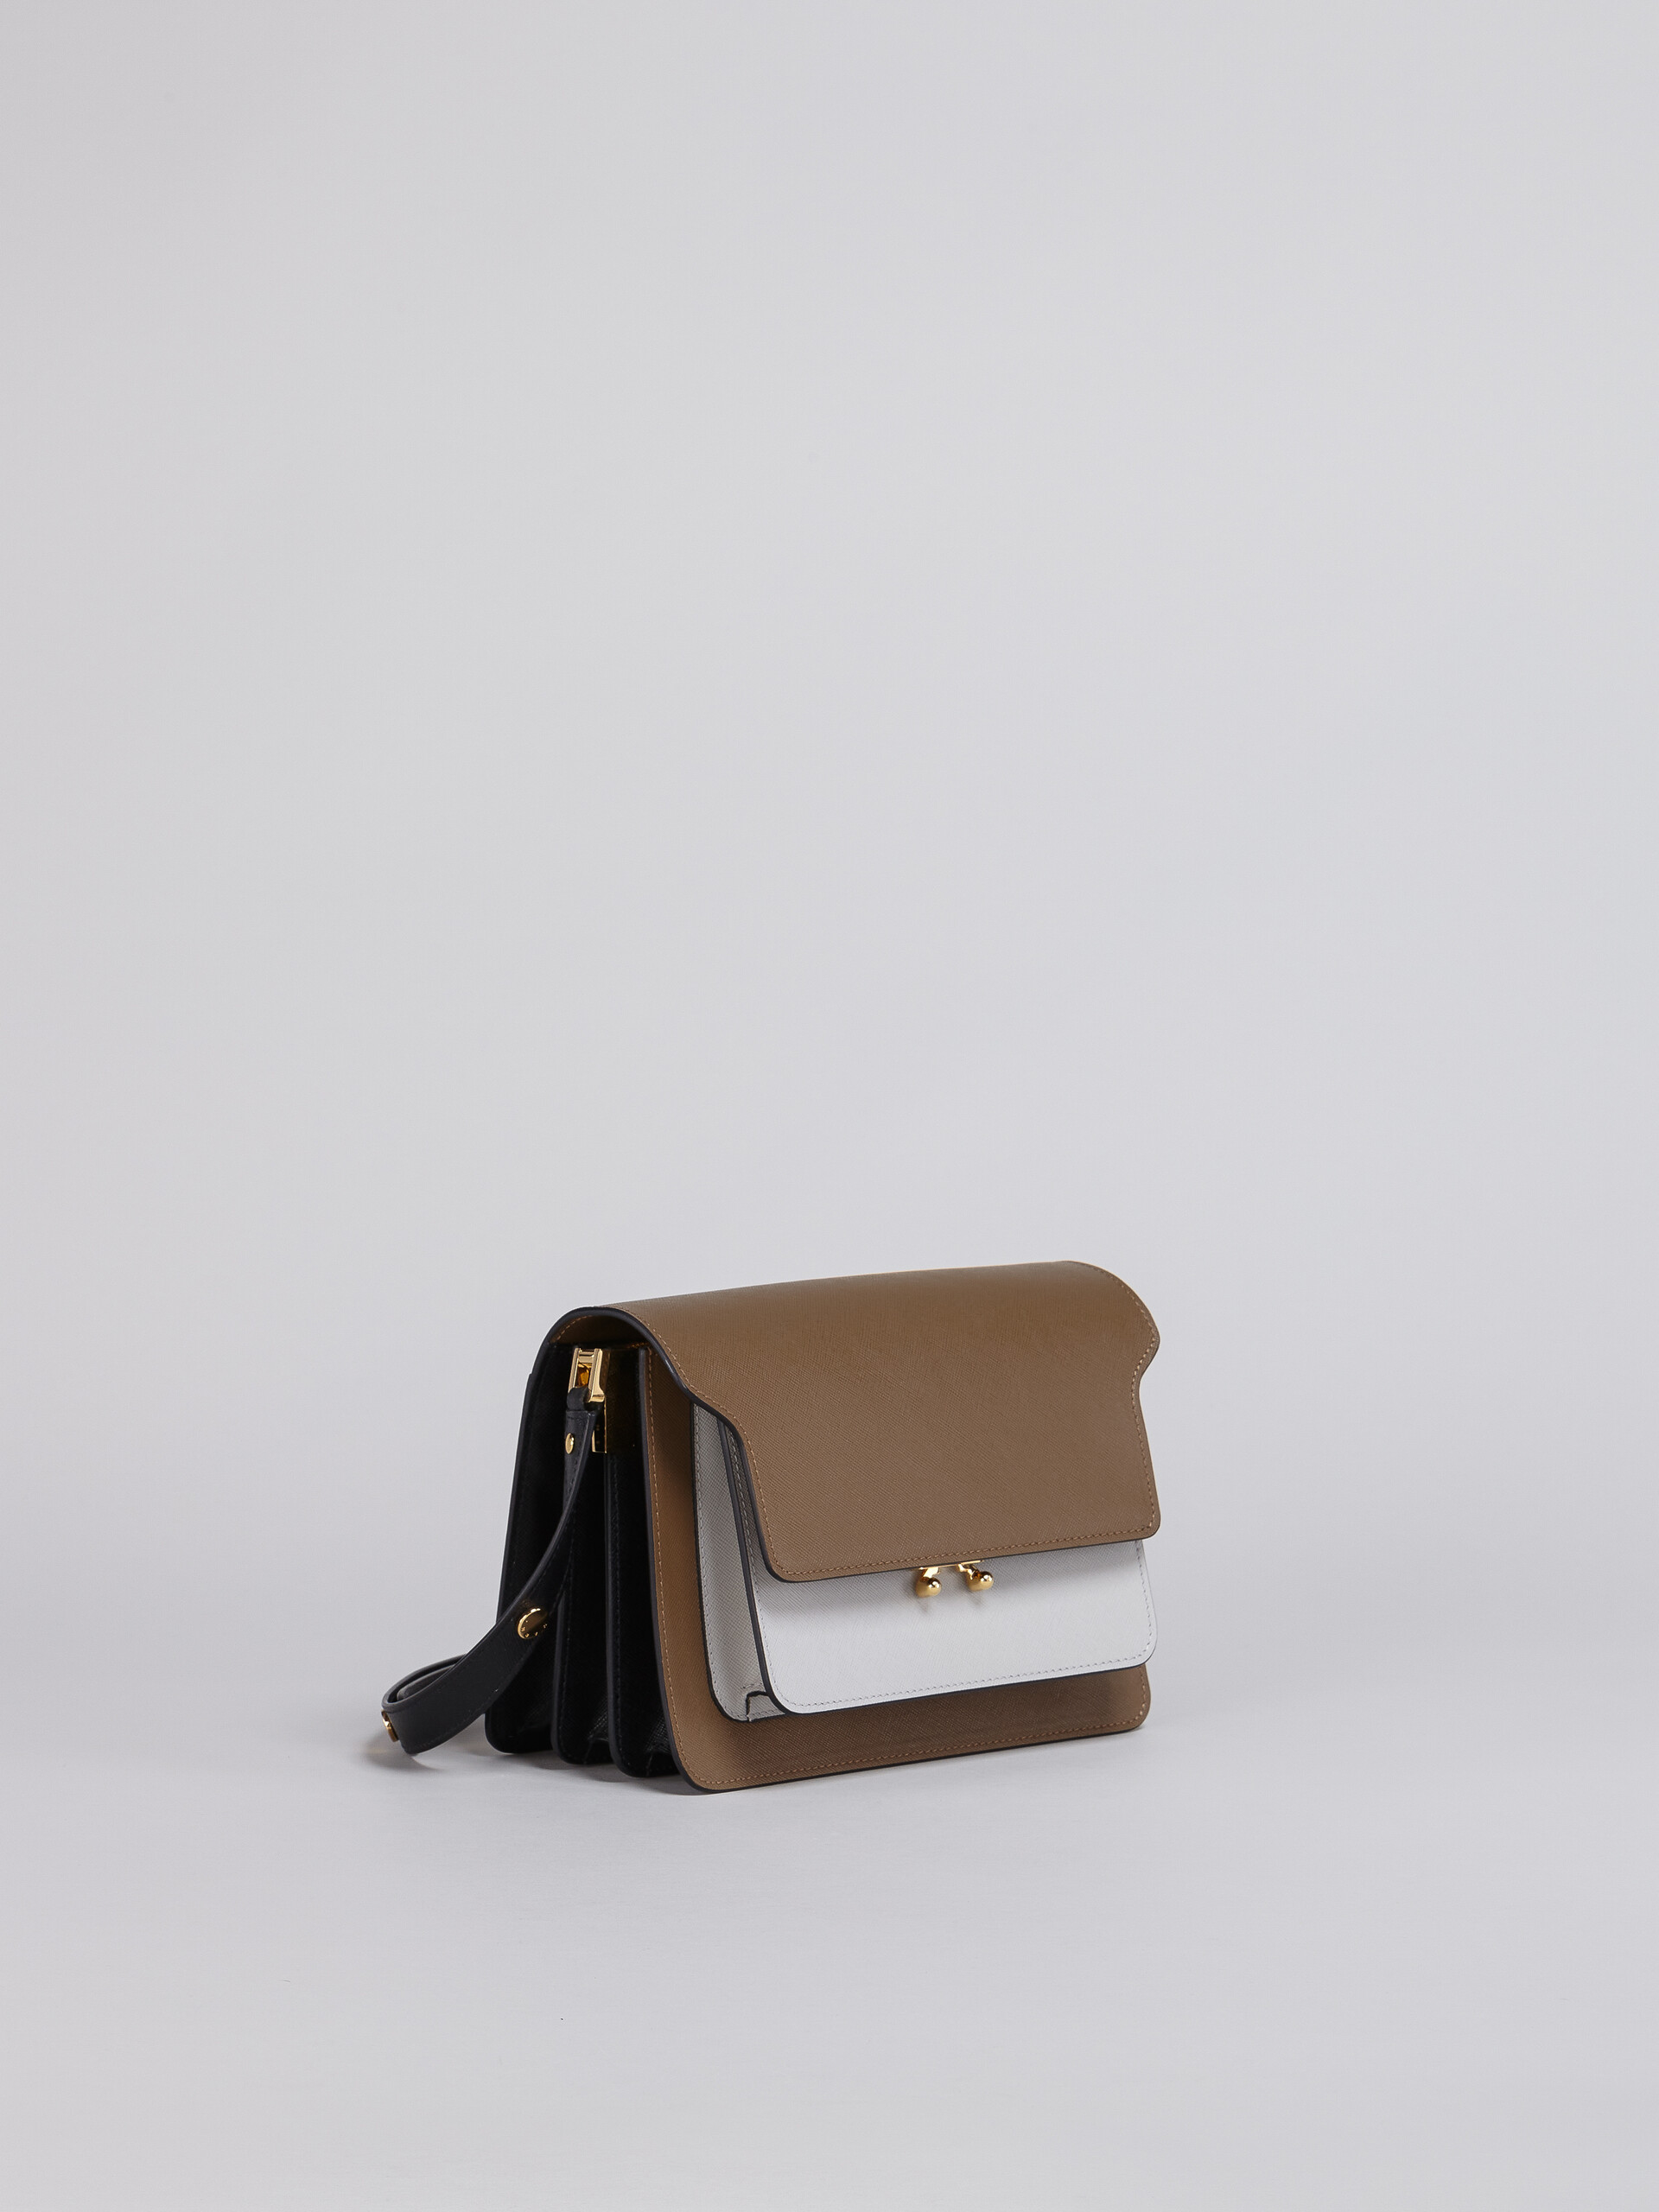 TRUNK medium bag in brown grey and black saffiano leather - Shoulder Bags - Image 5